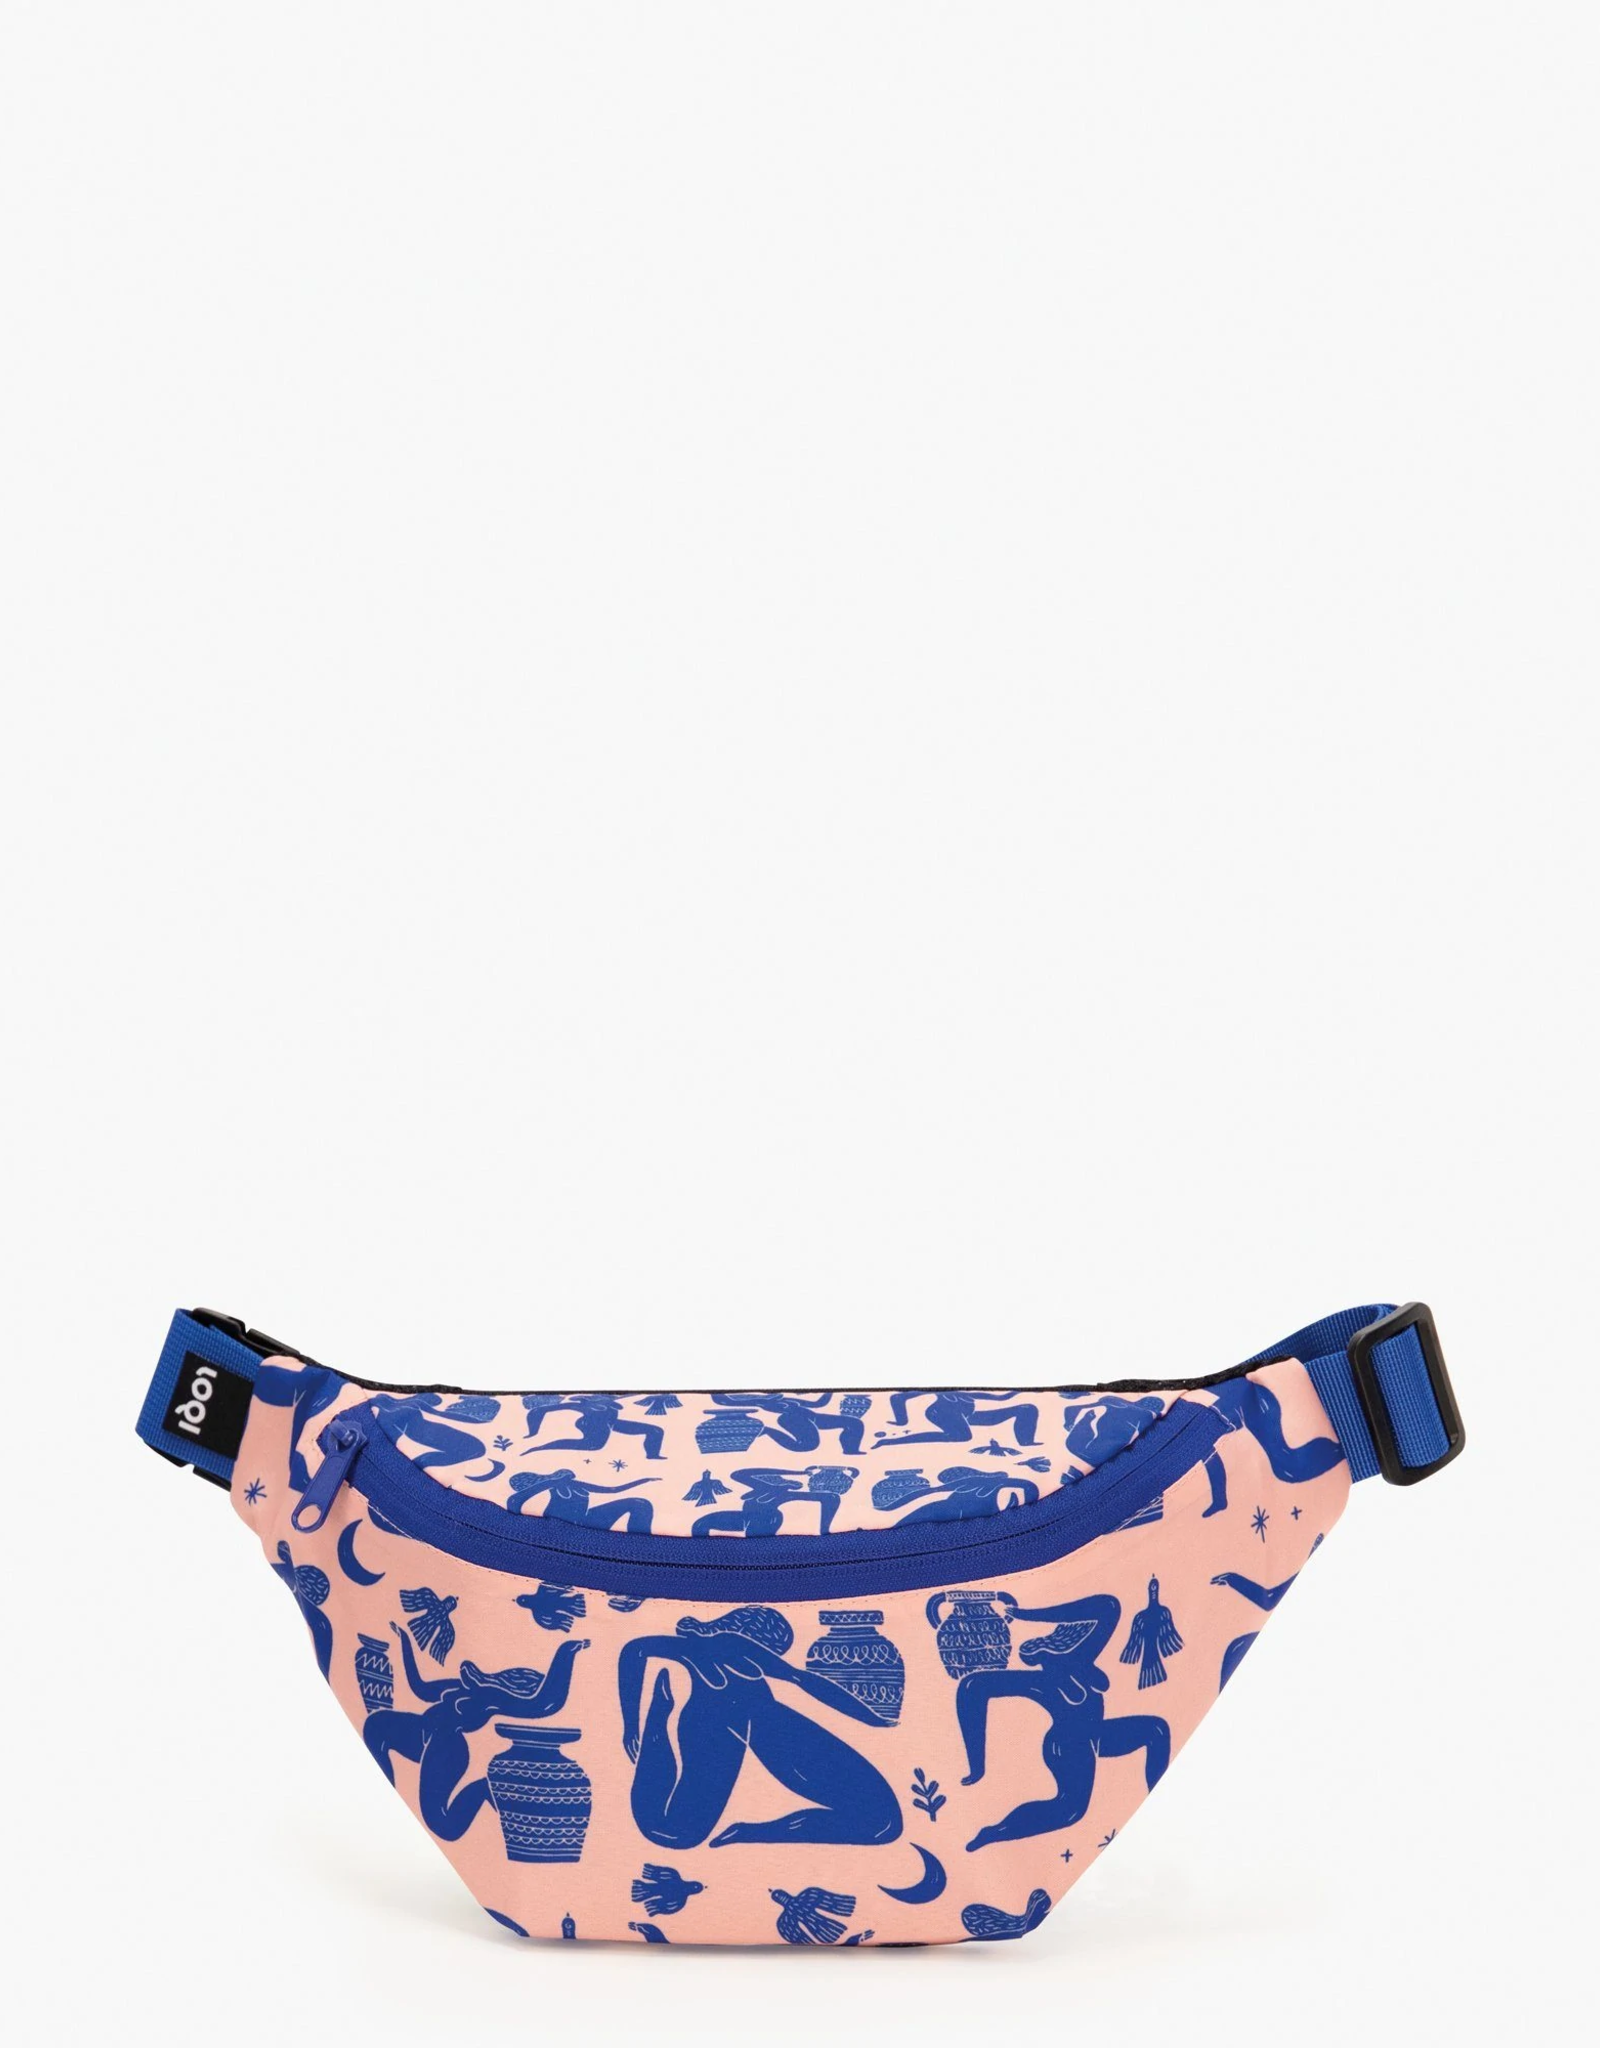 The Sarut Group Fanny Pack: Ladies & Vases